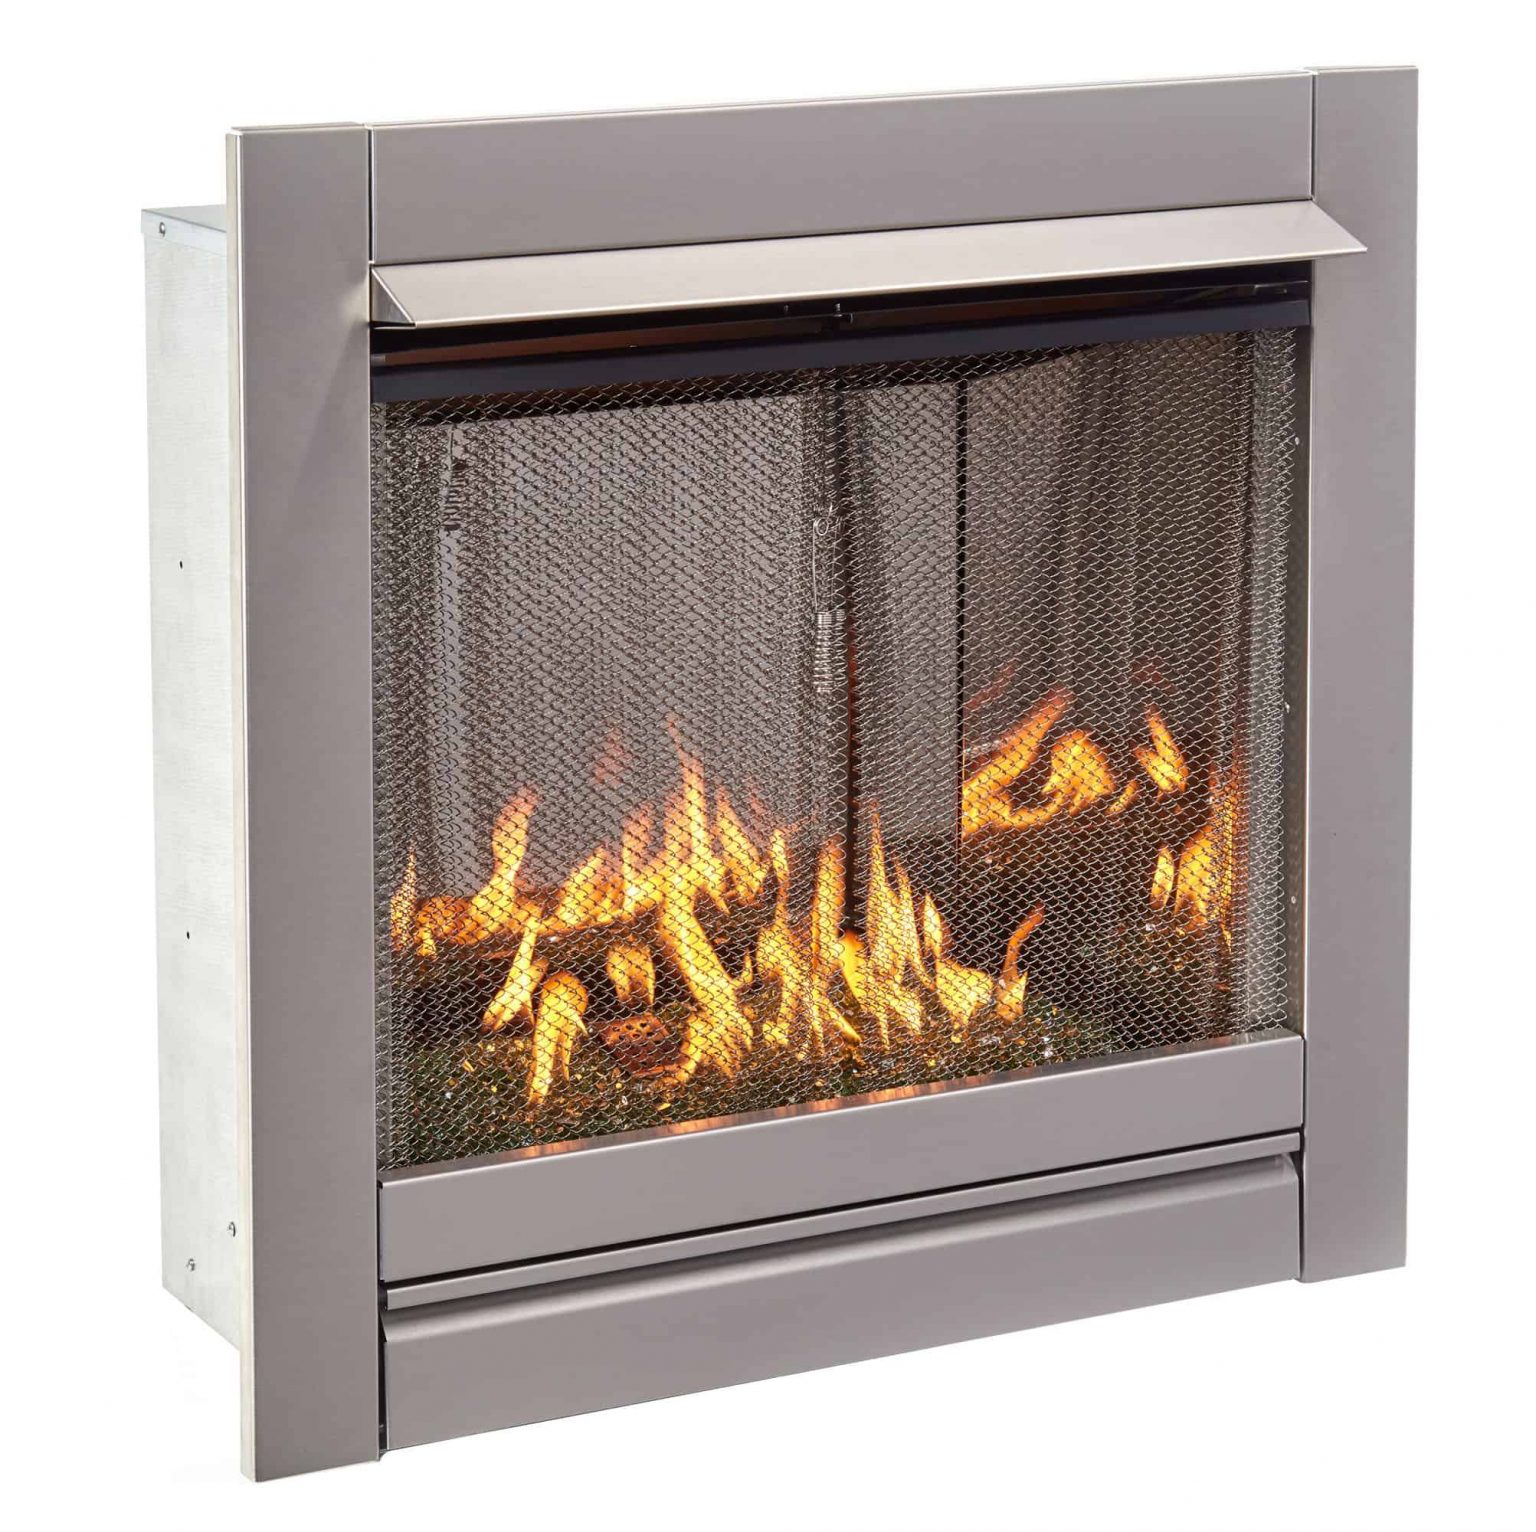 Duluth Forge Vent Free Stainless Outdoor Gas Fireplace Insert With Emerald Green Fire Glass Media 24000 BTU Model DF450SS G REM 1 1536x1532 